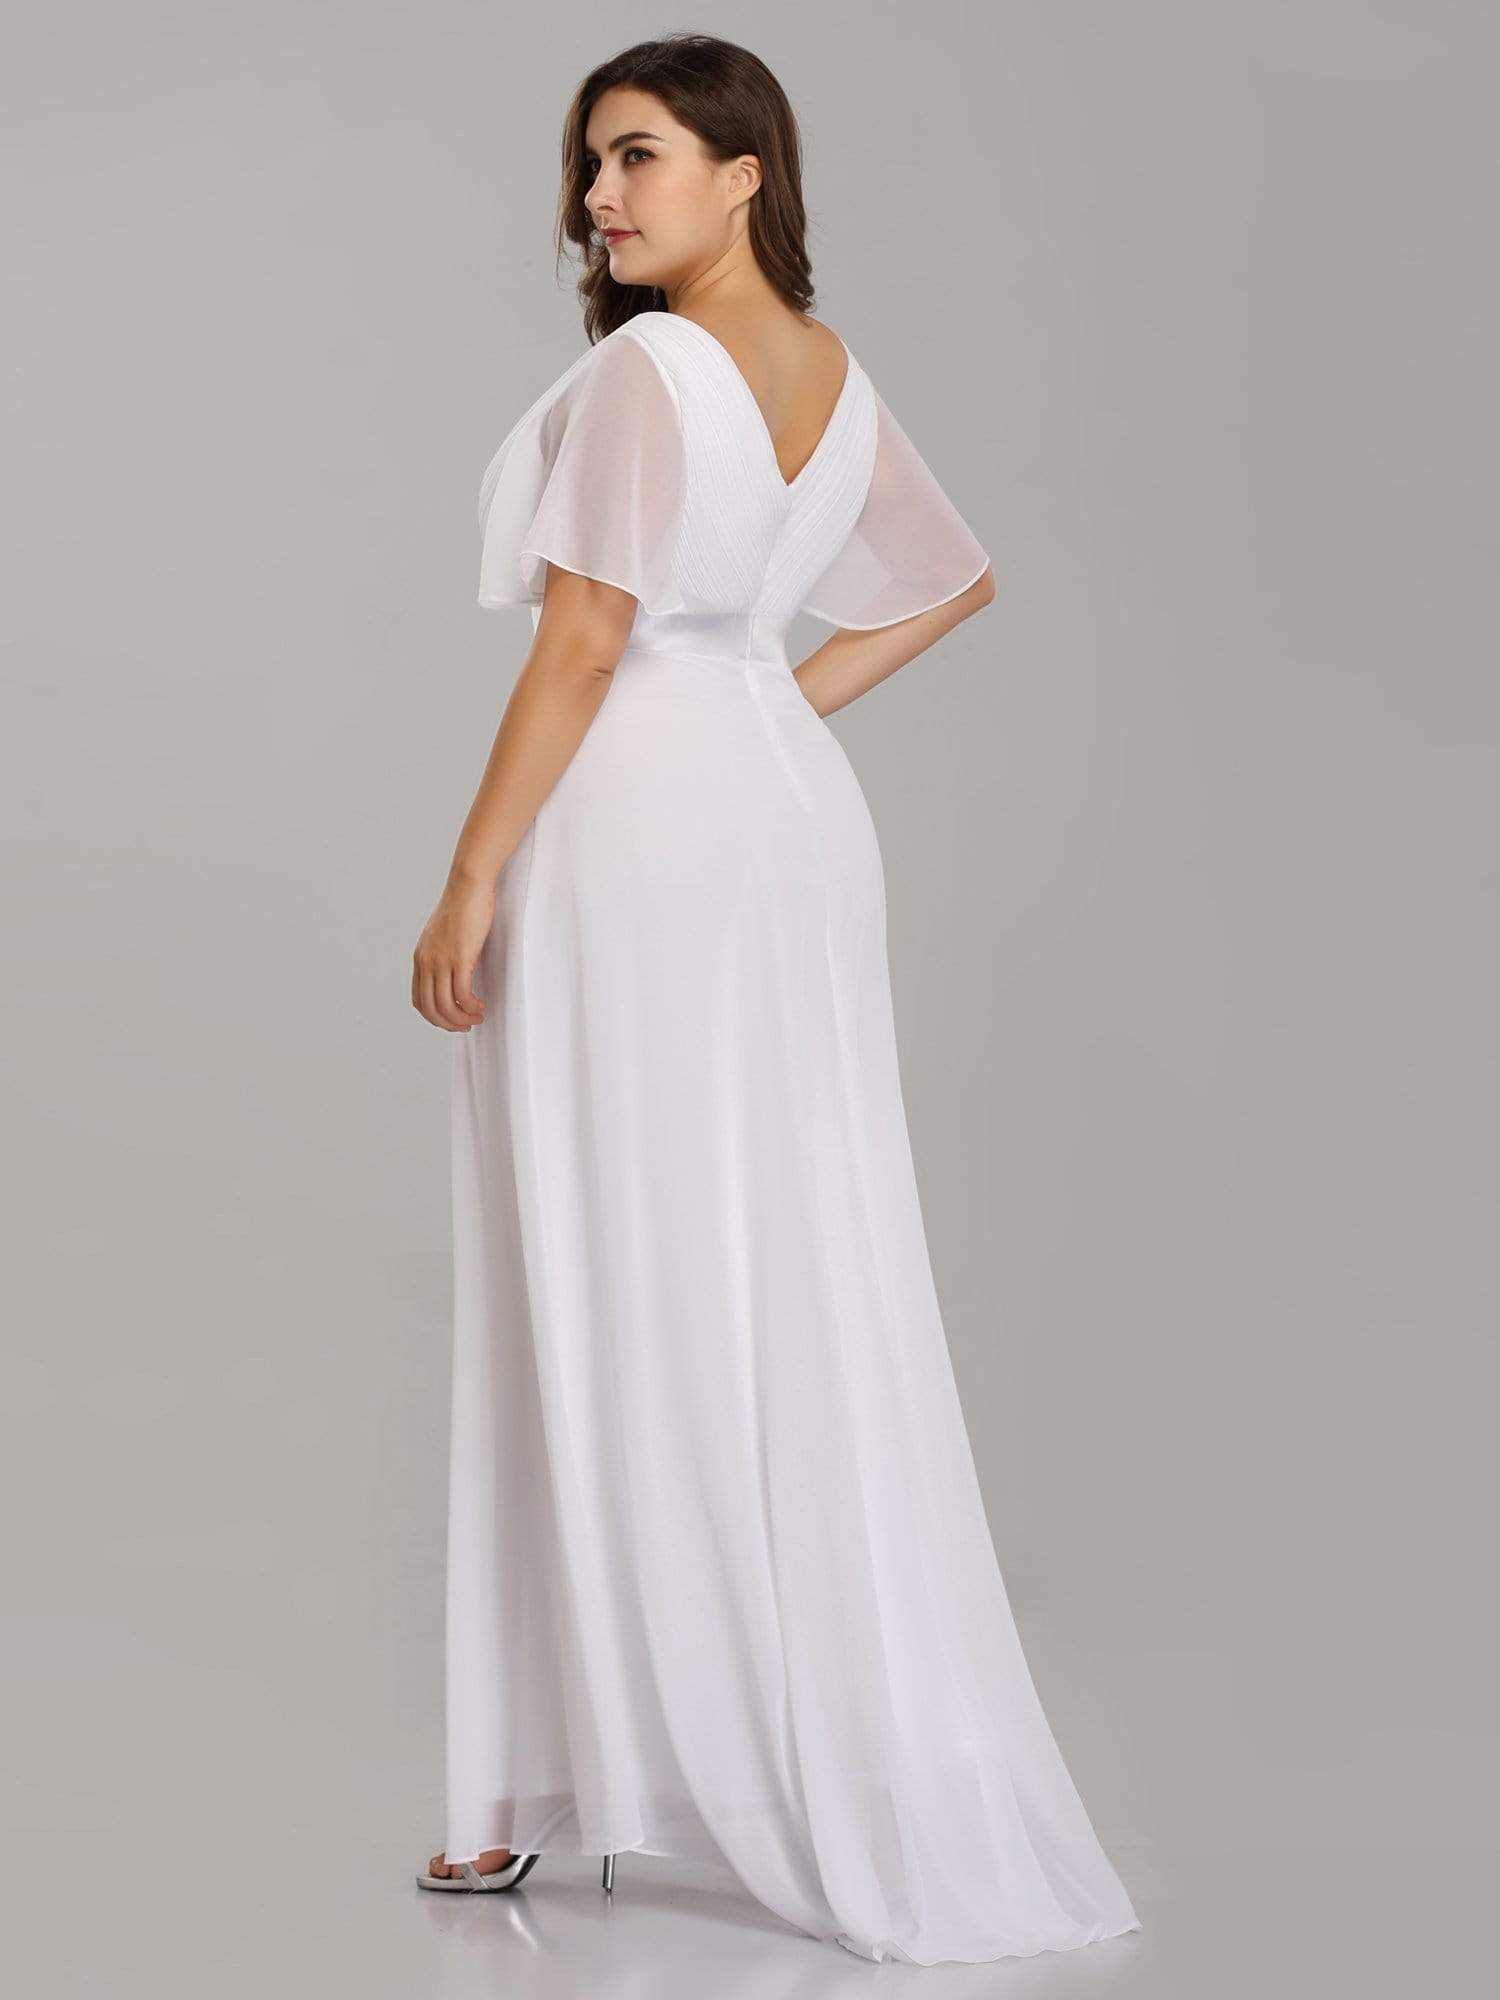 COLOR=White | Long Empire Waist Evening Dress With Short Flutter Sleeves-White 7